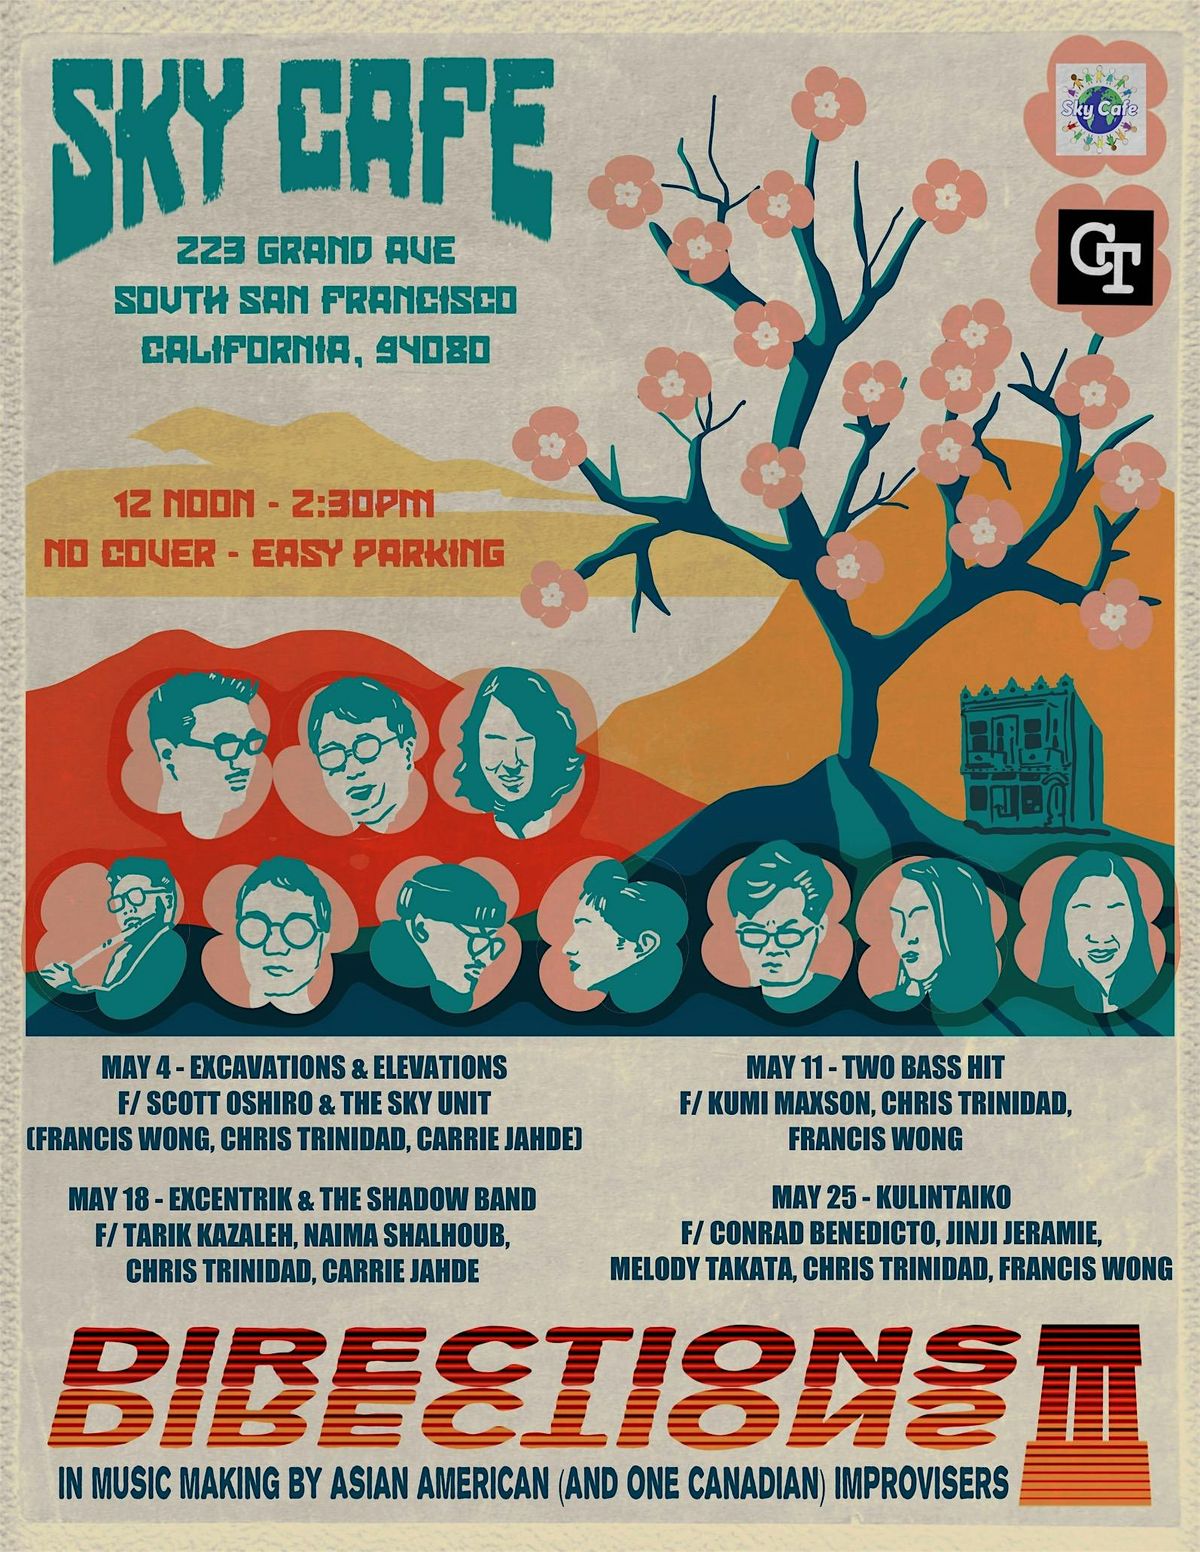 Directions in Music Making by Asian American (and Canadian) Improvisers III